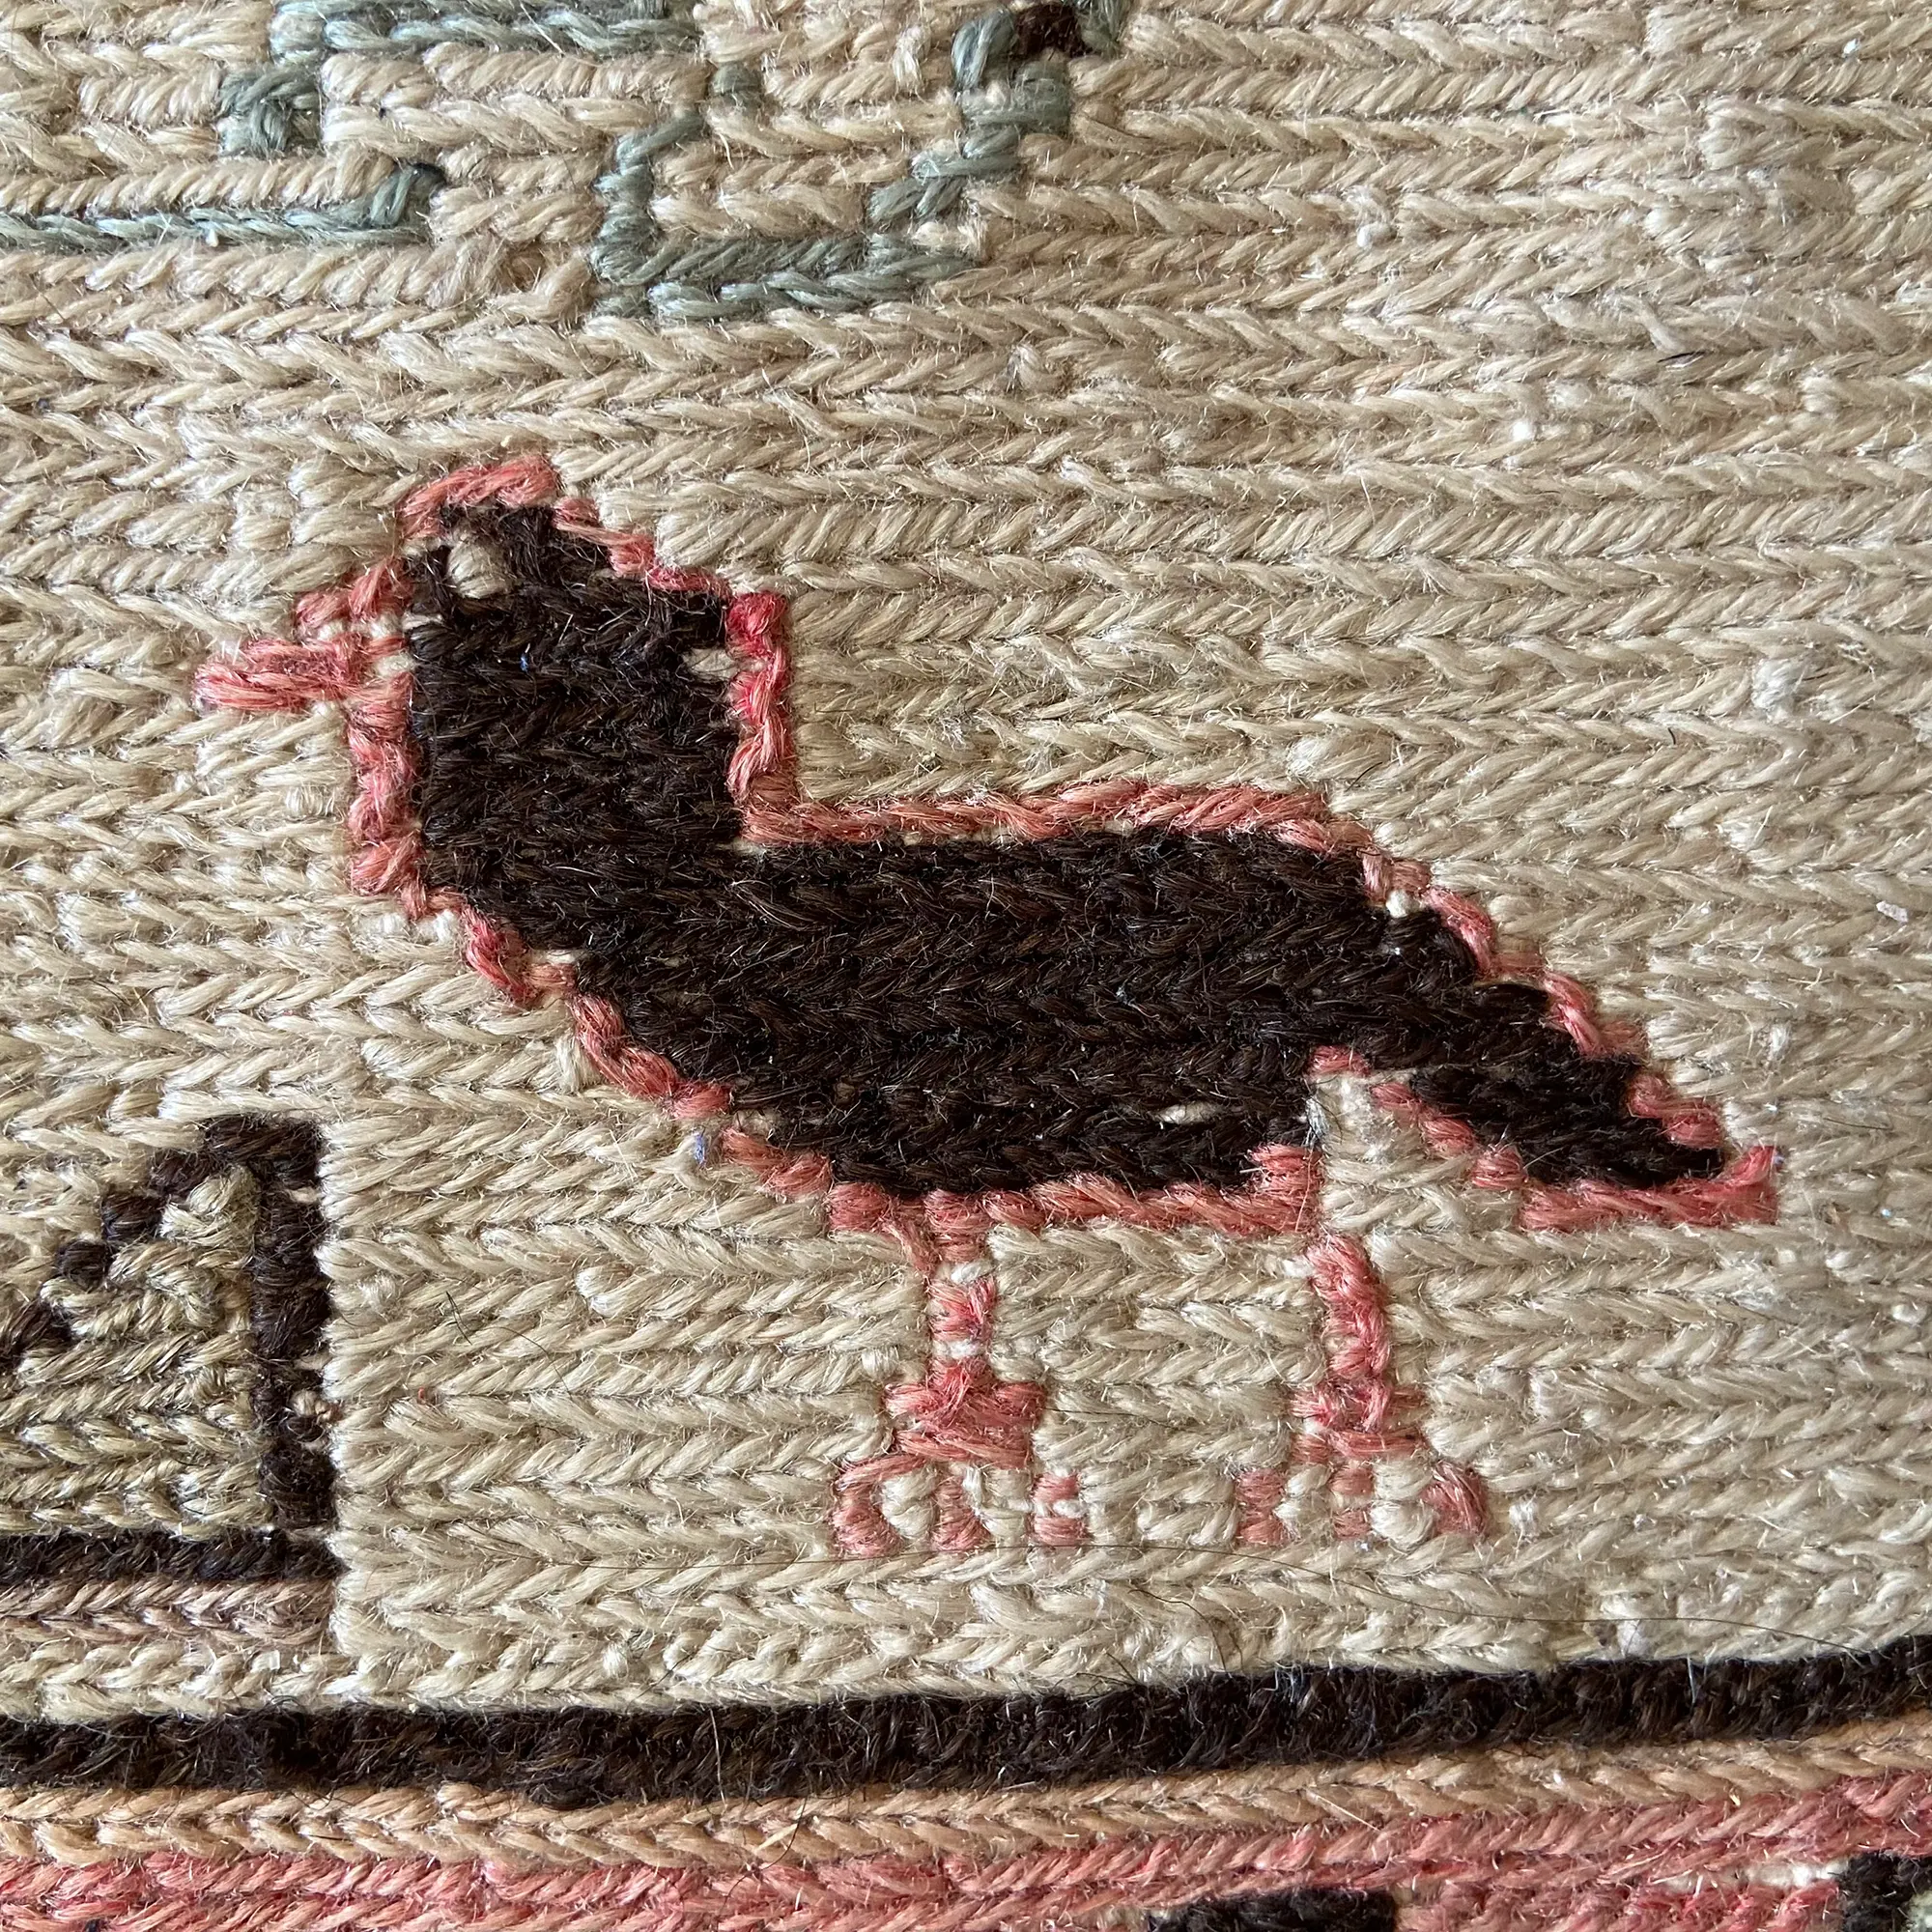 selver yıldırım: close-up of a traditional textile with an embroidered bird in black and pink on a beige woven background.